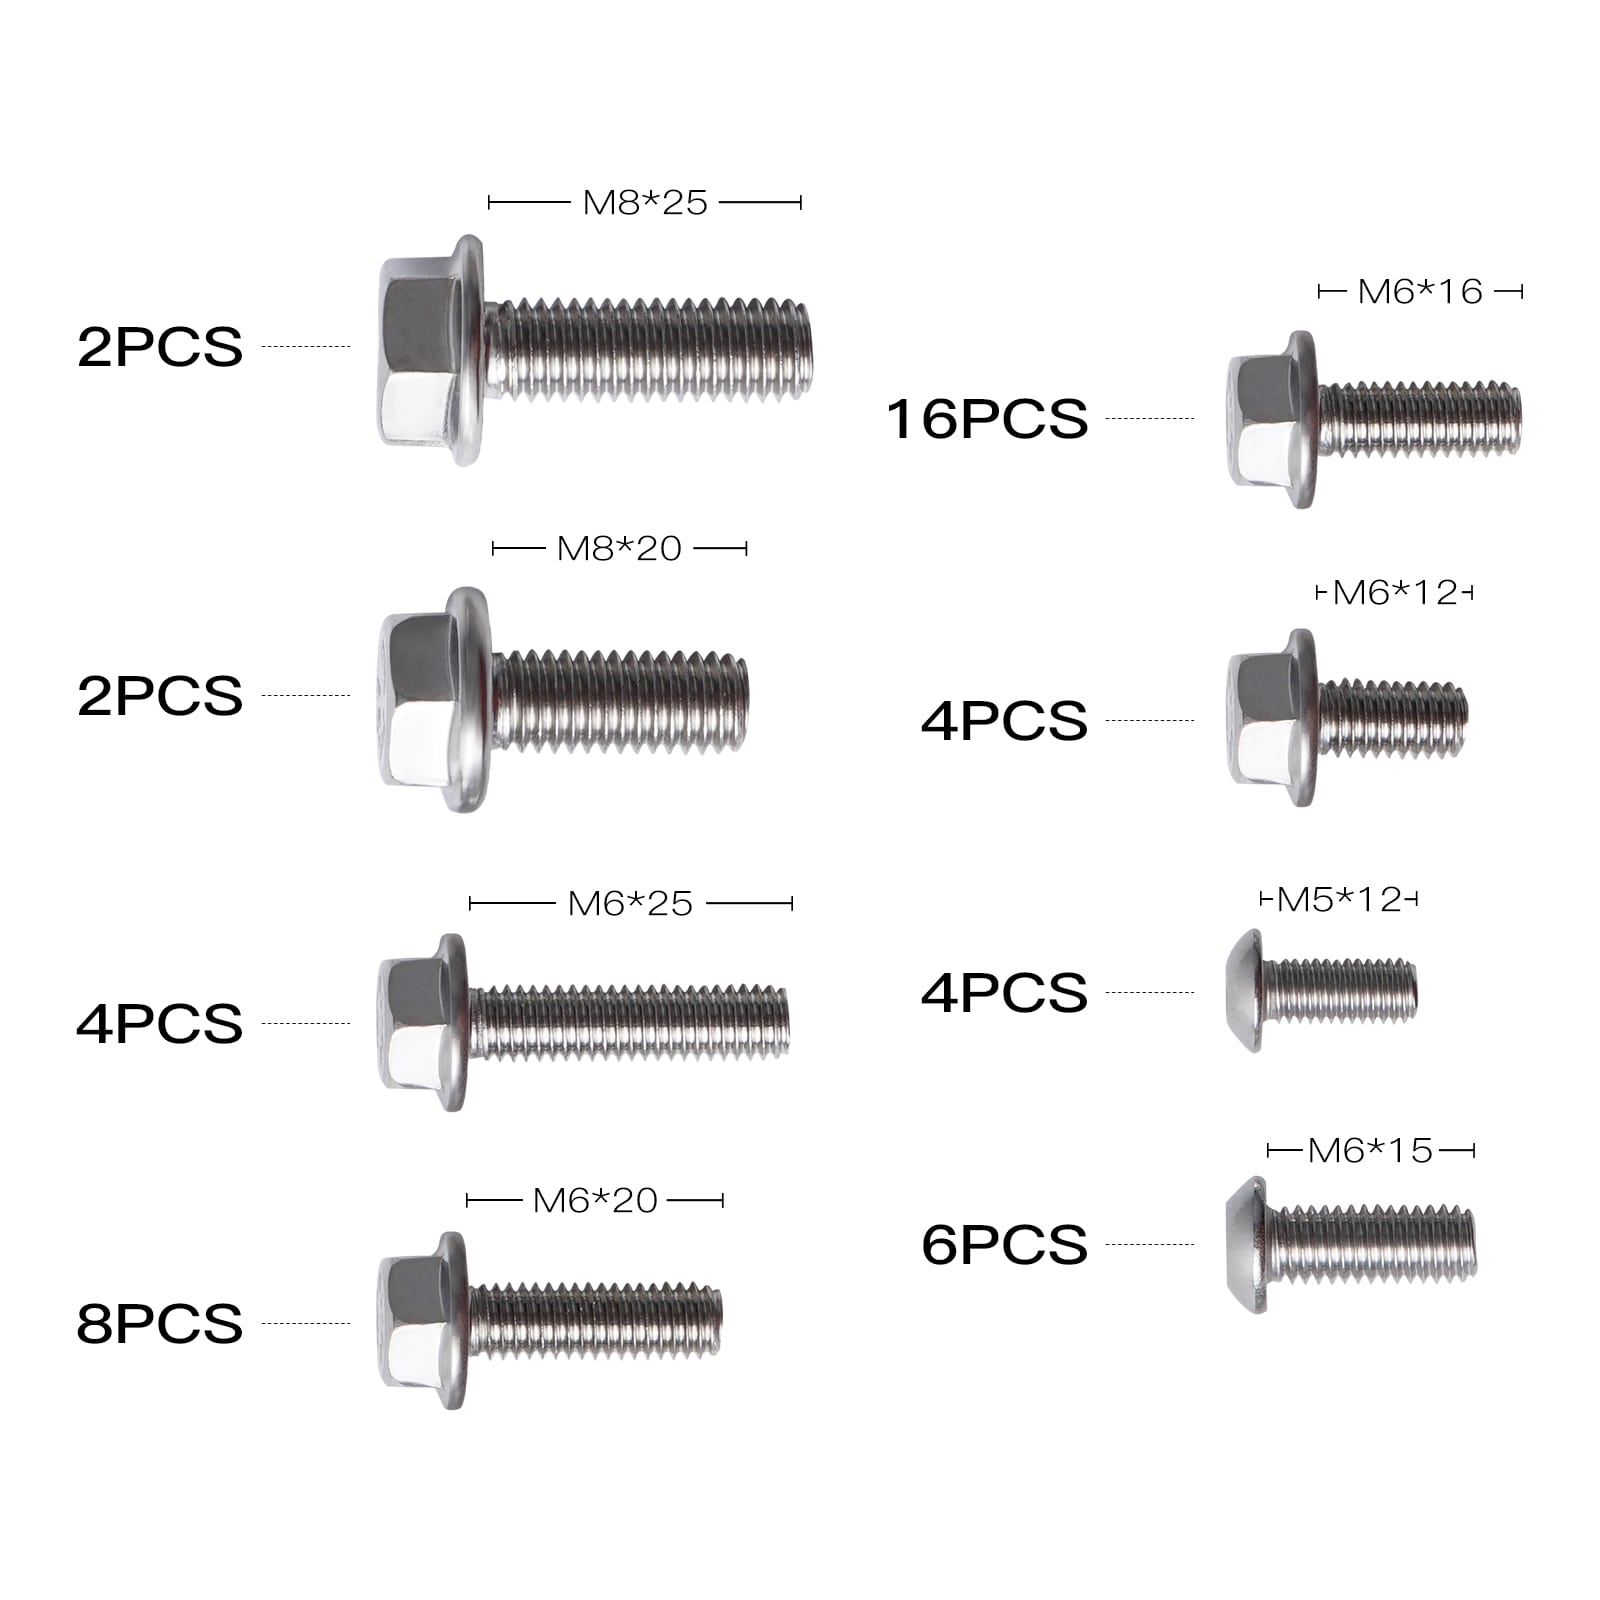 Motorcycle Screw Kit for Yamaha YZ85 YZ250 WR250F WR250R WR450F